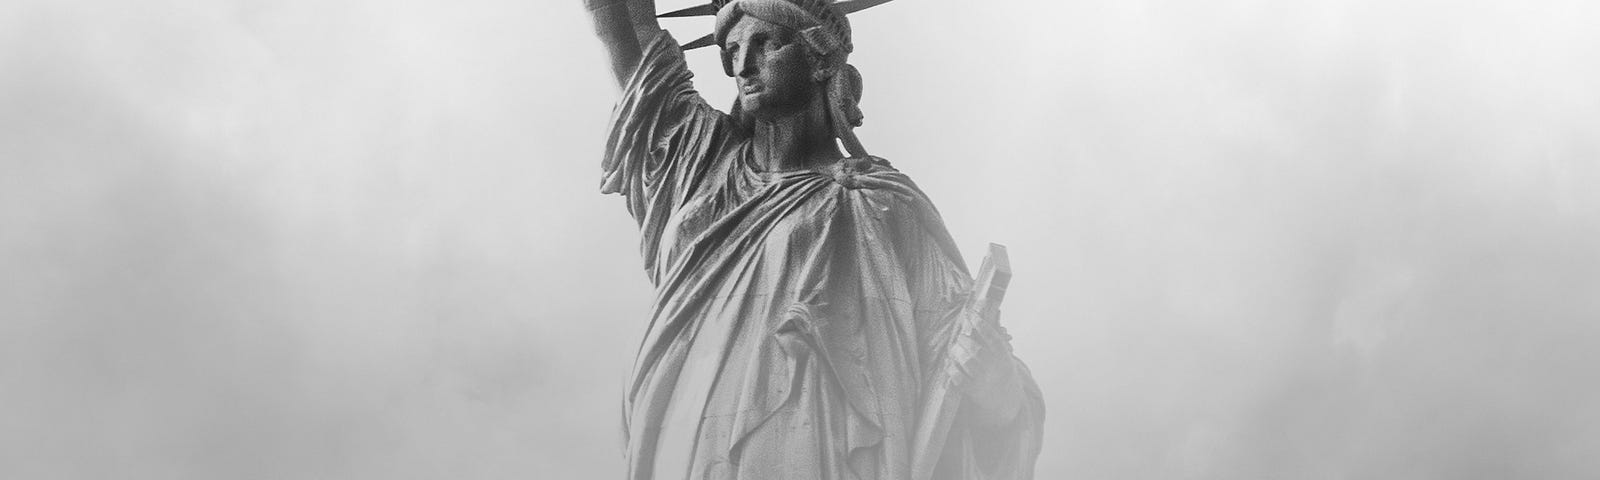 The Statue of Liberty waist up out of a mist. All in grays, black and white.